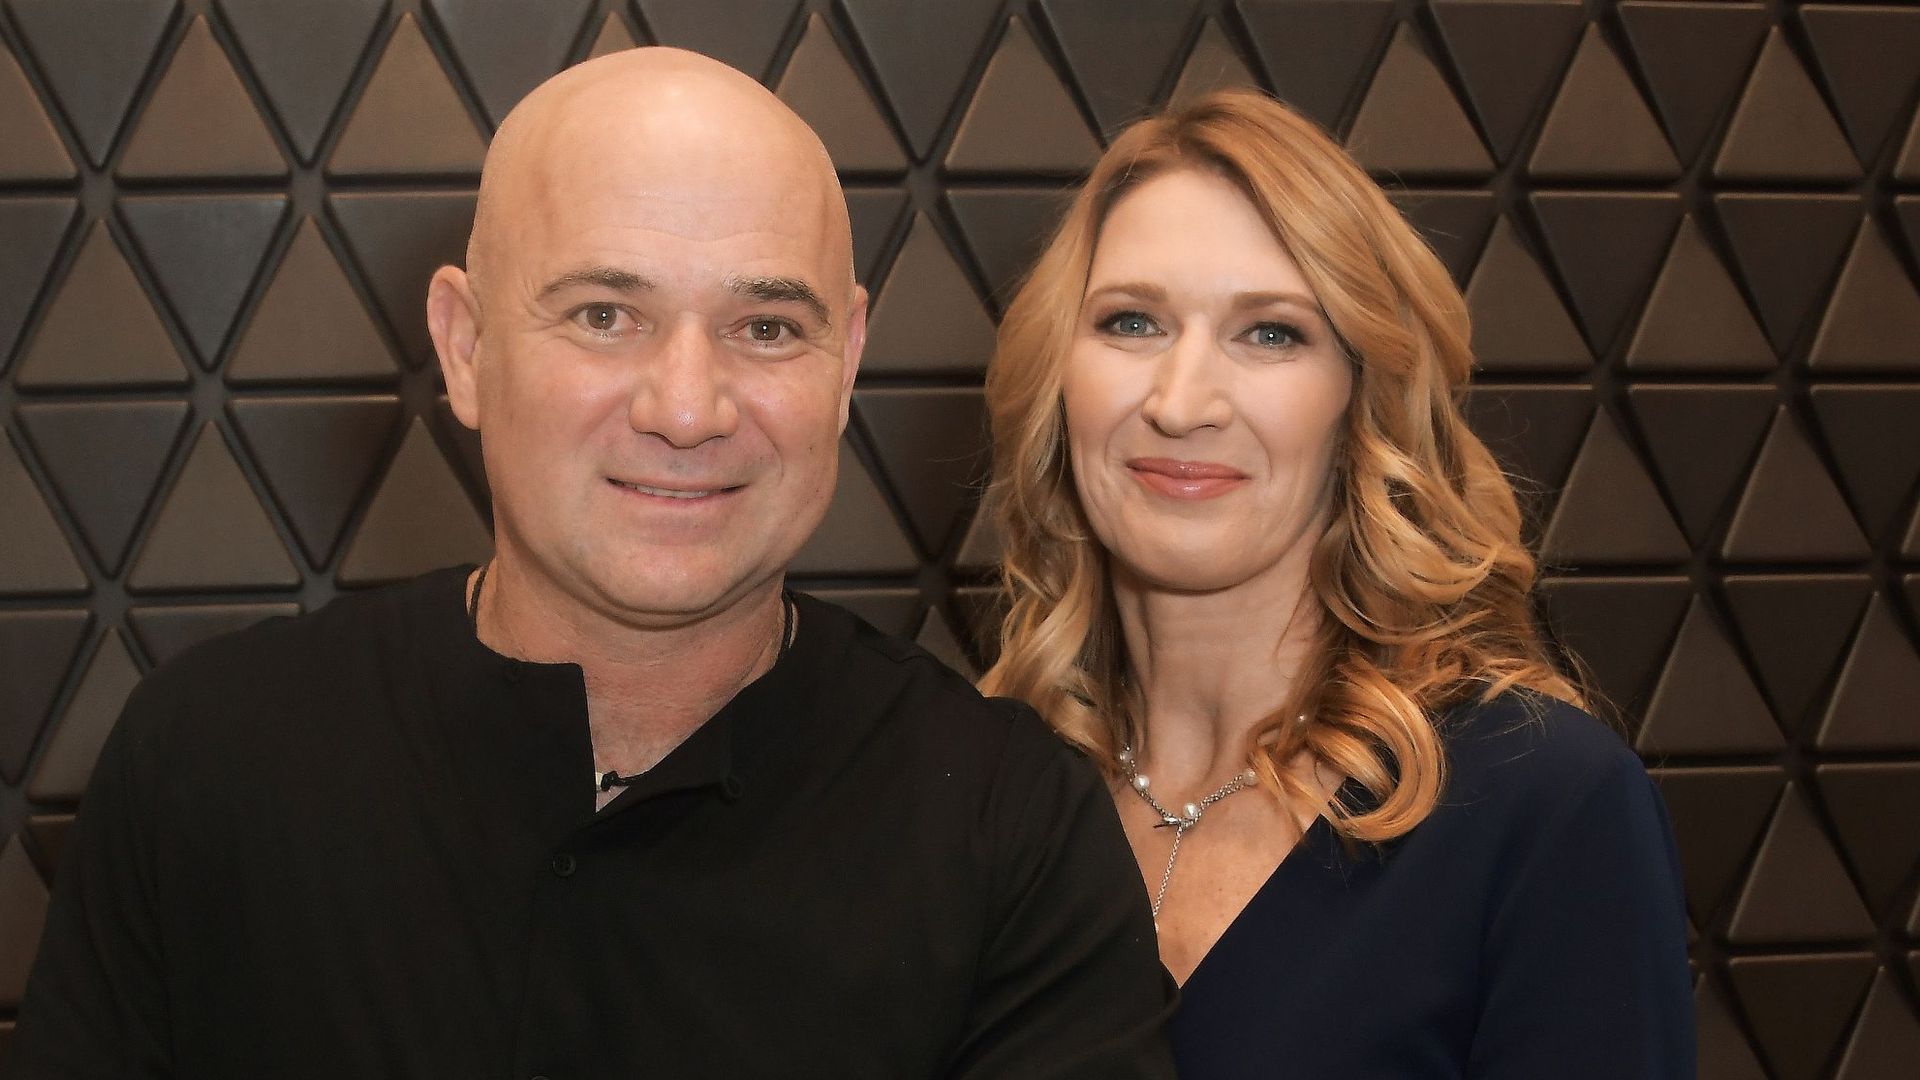 Andre Agassi cuddling wife Steffi Graf at Longines New Shop Opening